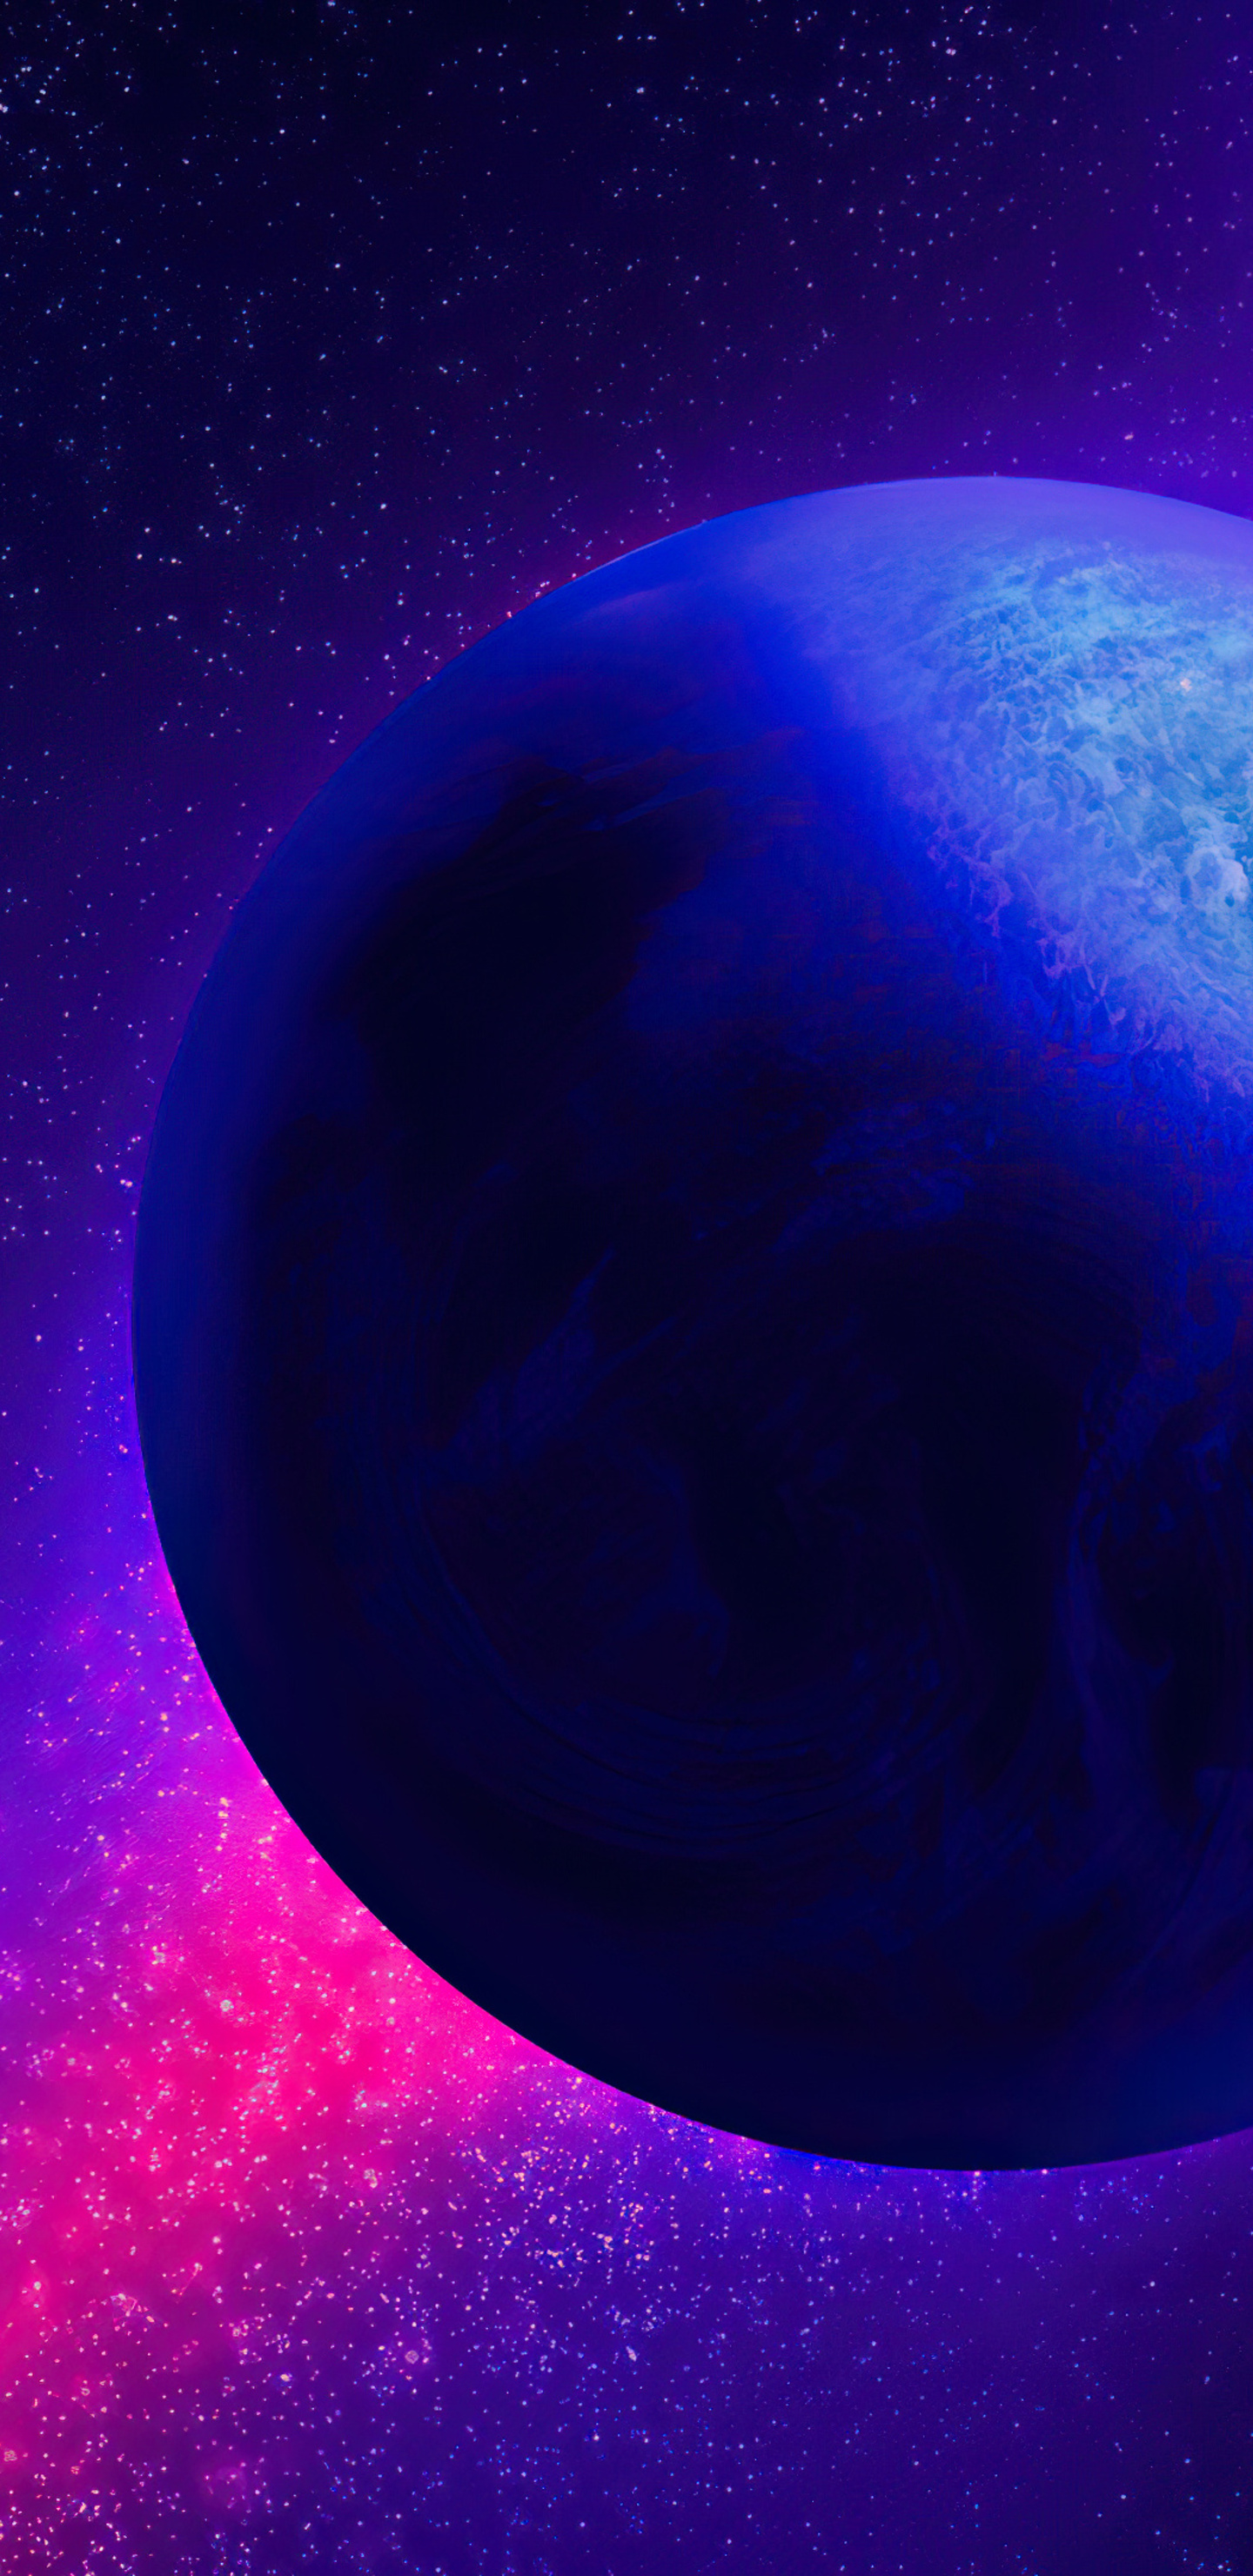 1440x2960 Ocean World Outer Space Samsung Galaxy Note 9,8, S9,S8,S8 ...